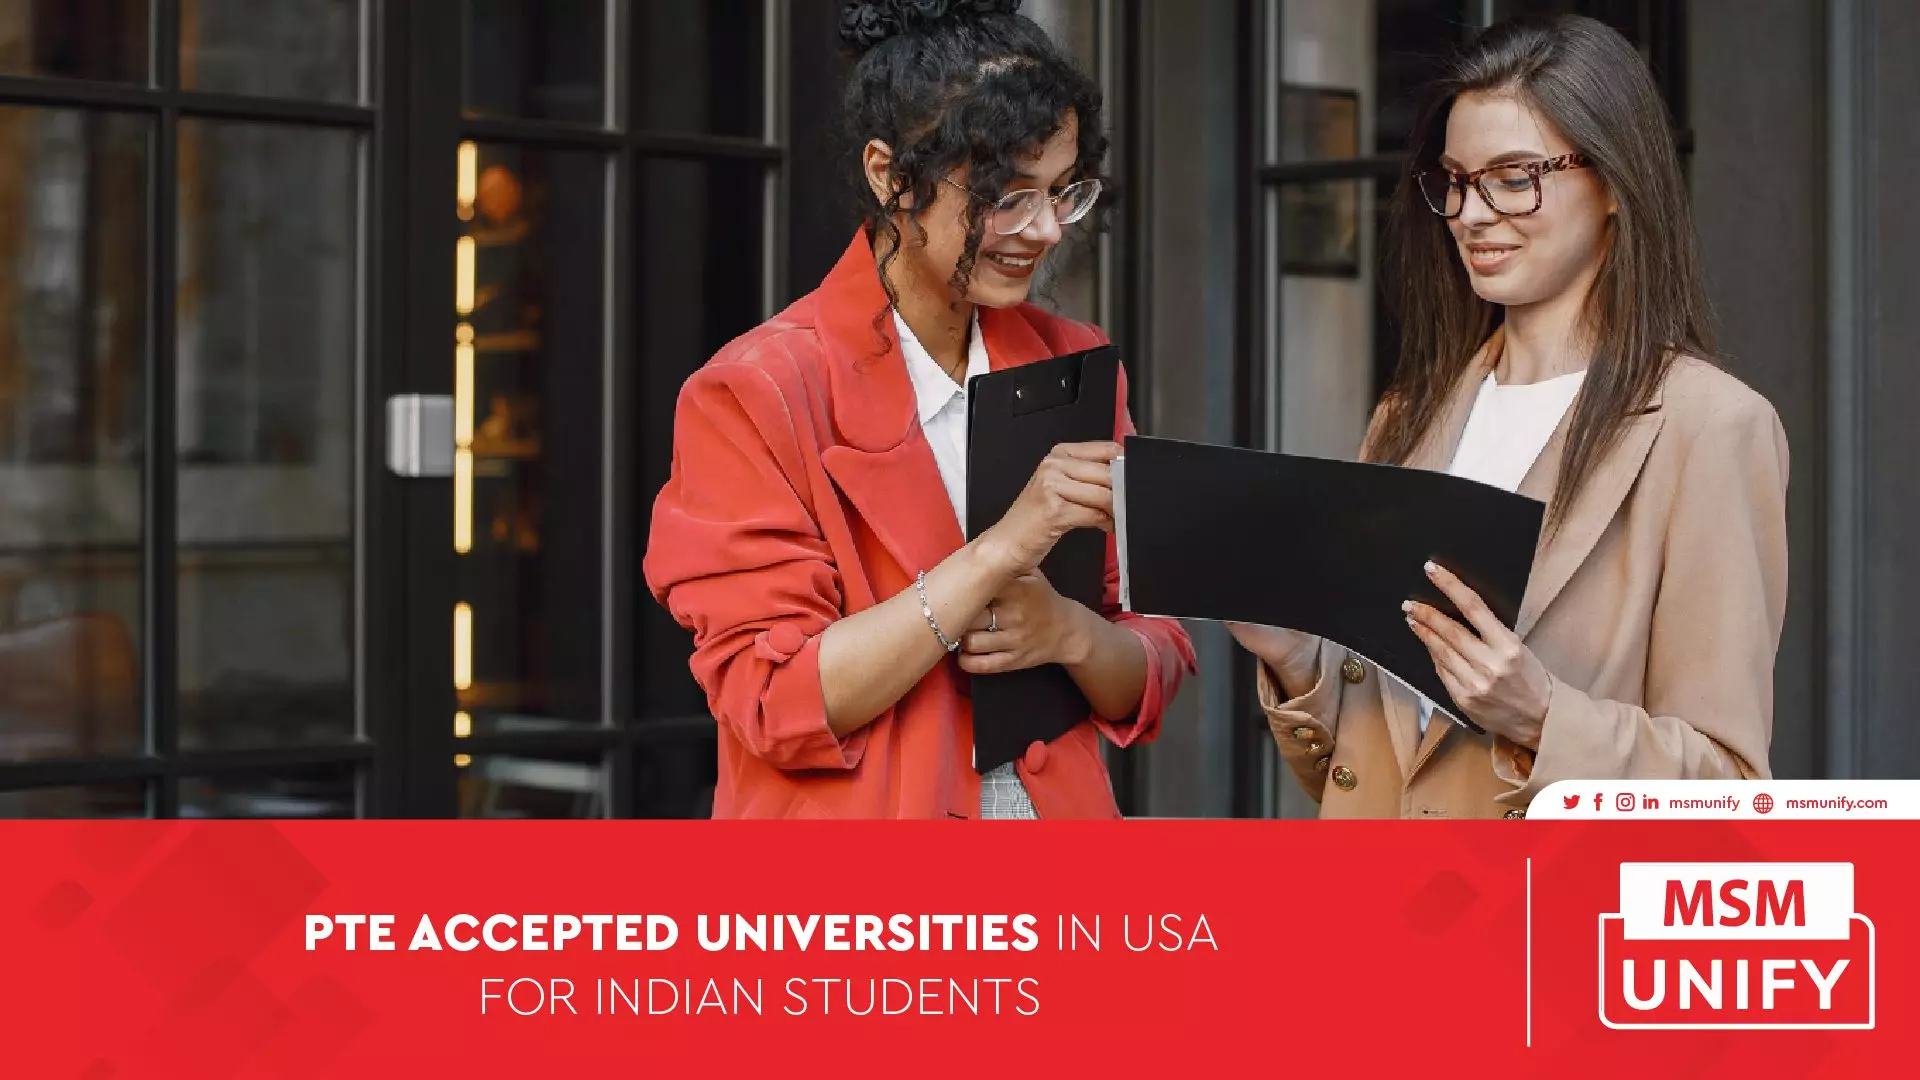 011623 MSM Unify PTE Accepted Universities in USA for Indian Students 01